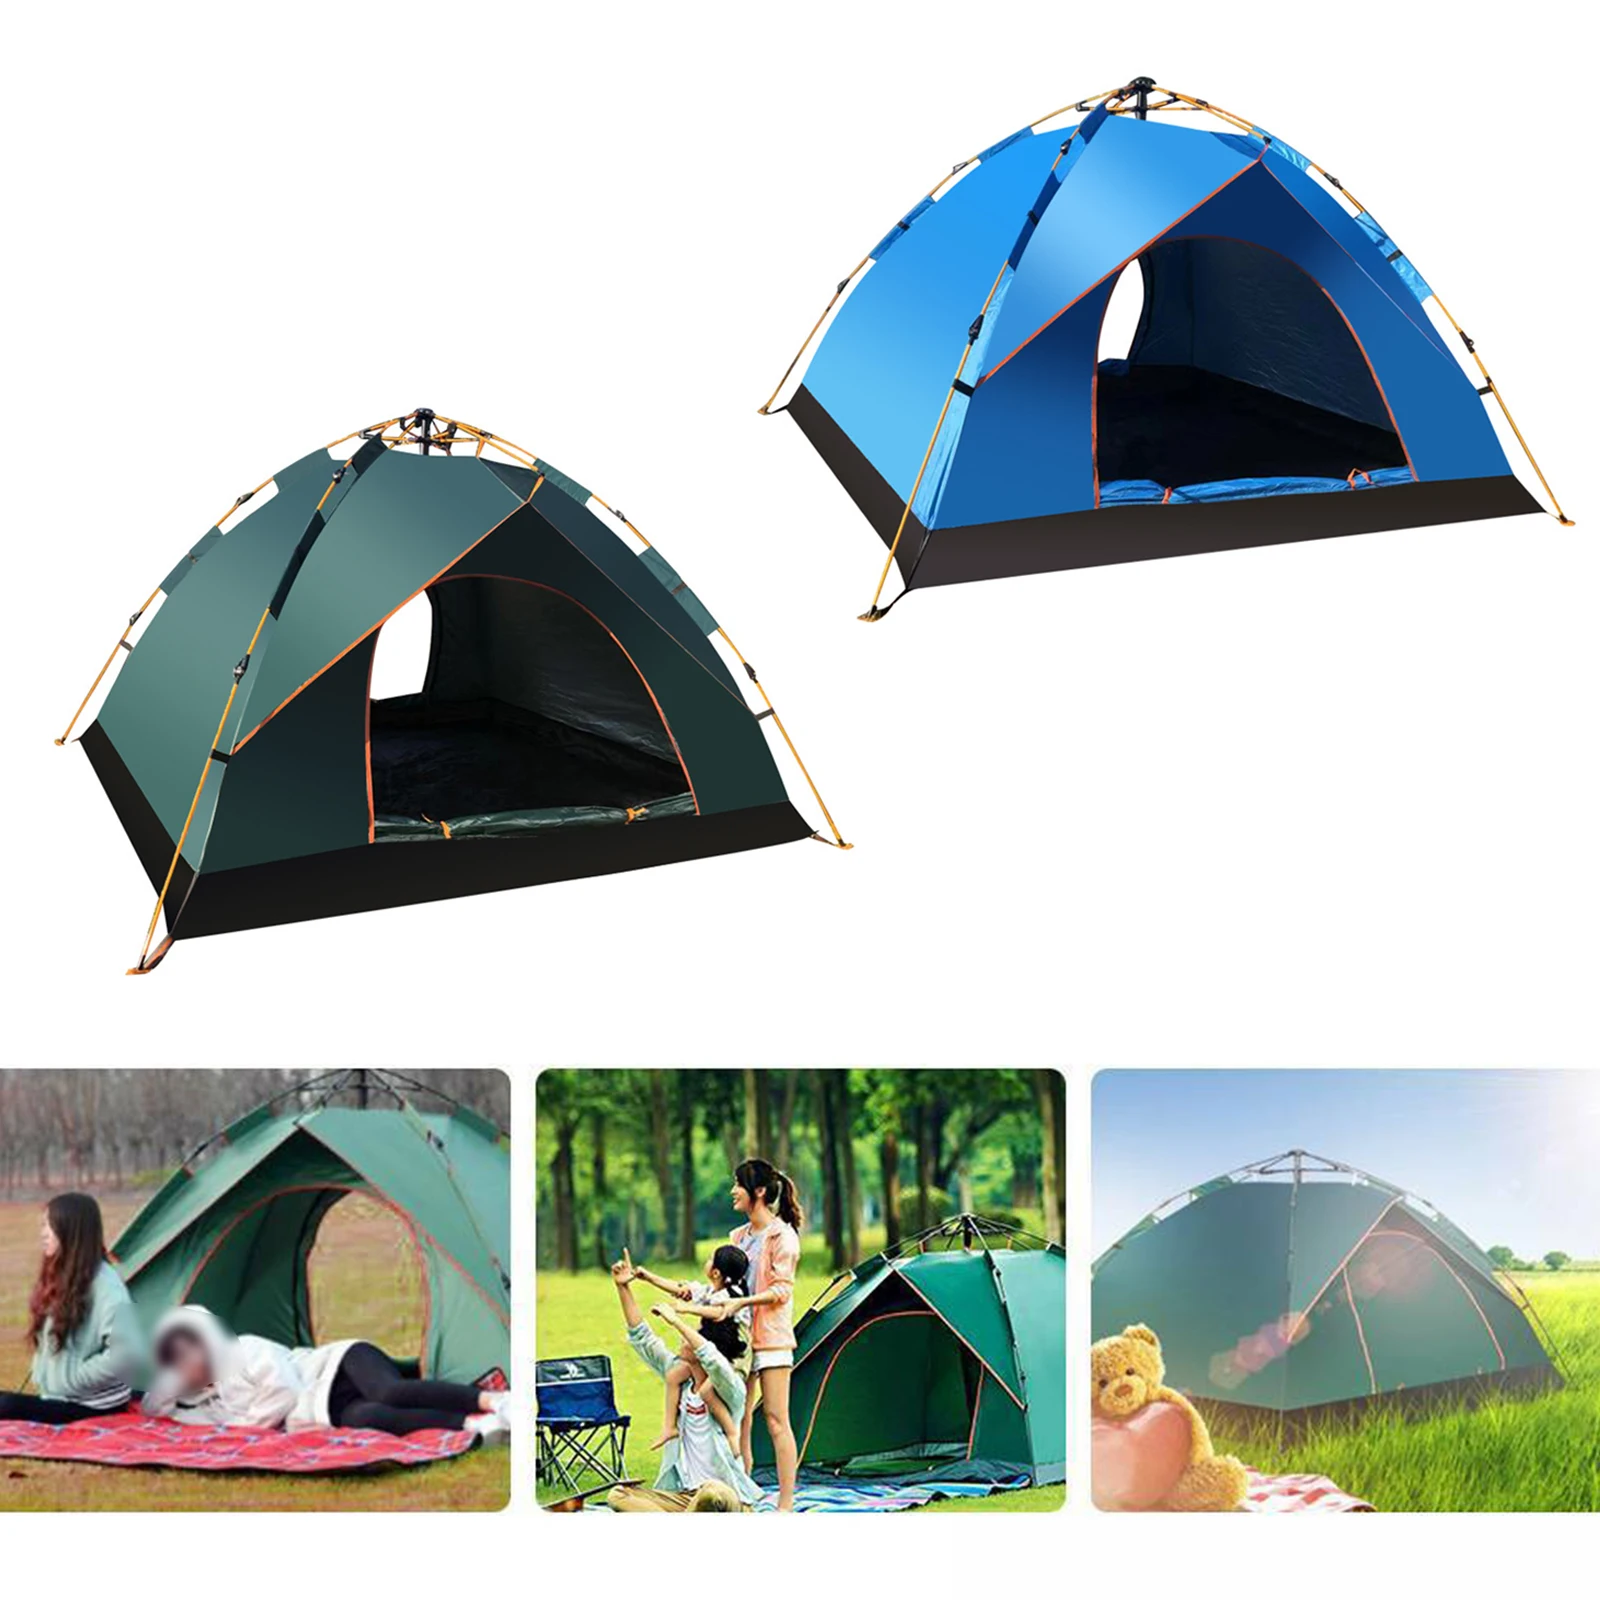 

Automatic Tent 3-4 Person Camping Tents Easy Instant Setup Protable Backpacking for Outside Sun Shelter Travelling Hiking Camp